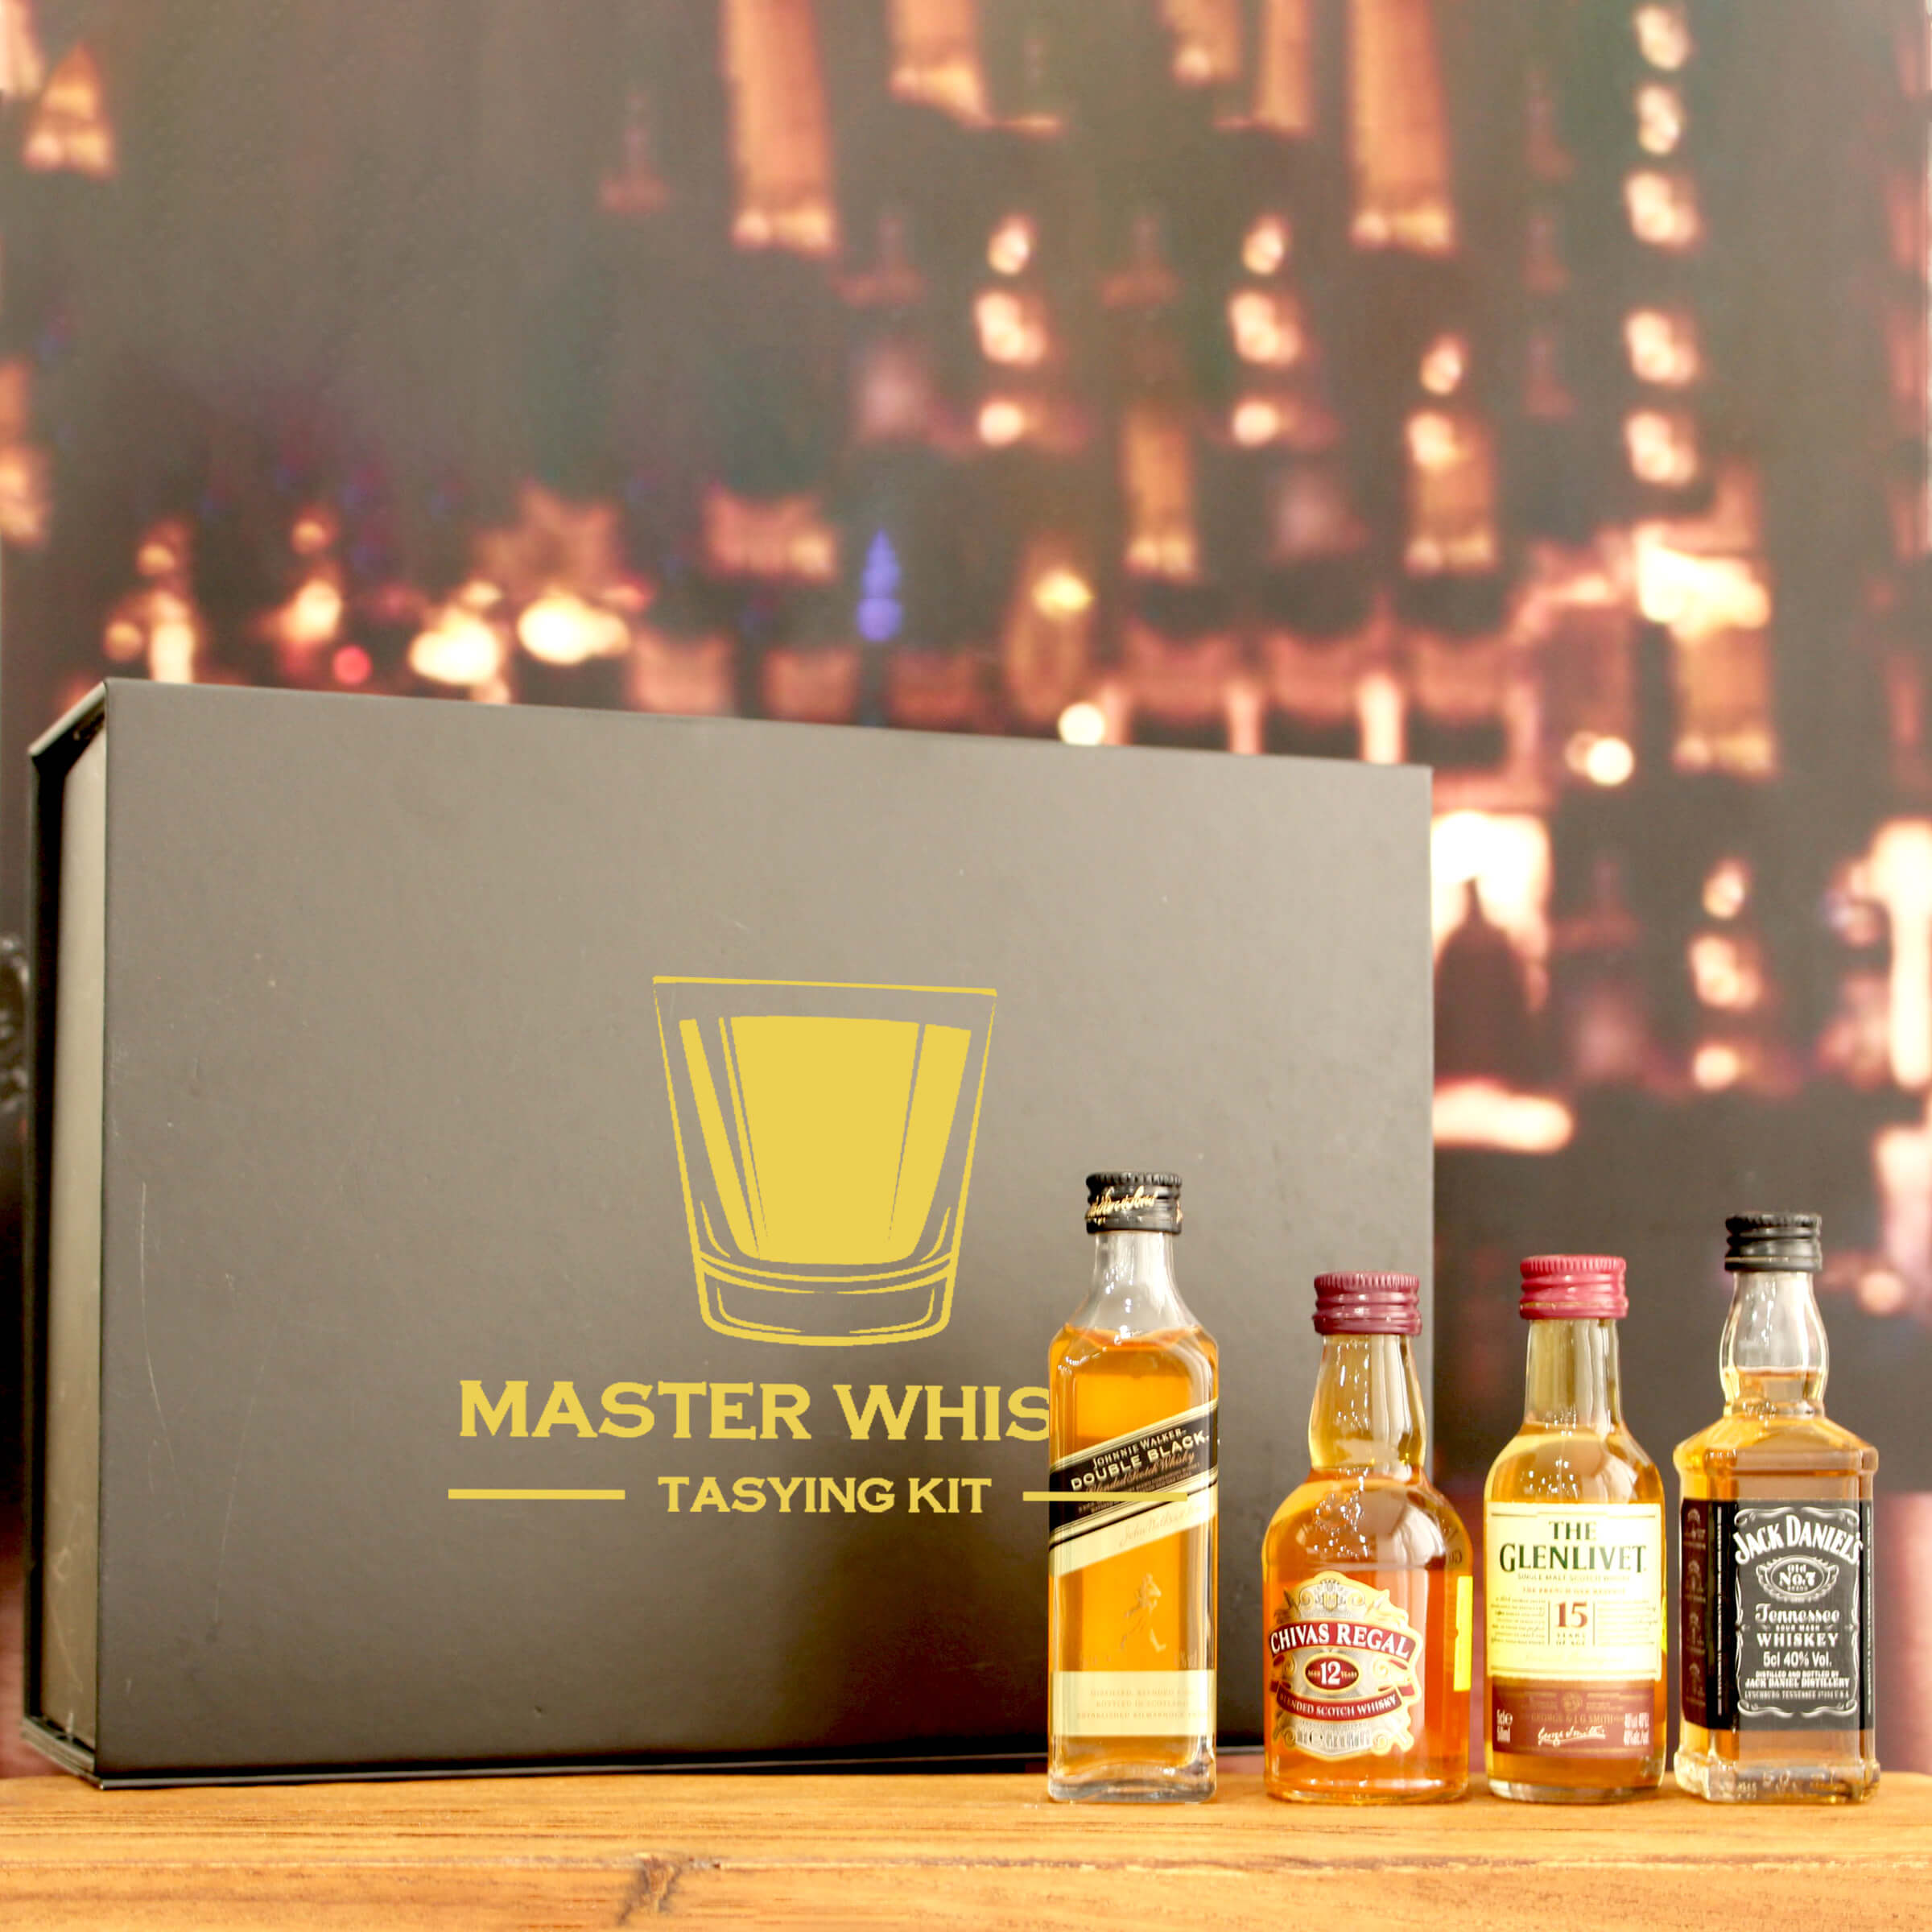 Master Whisky Tasting Kit with Engraving |威士忌大師品鑒套裝(含文字雕刻) - Design Your Own Wine